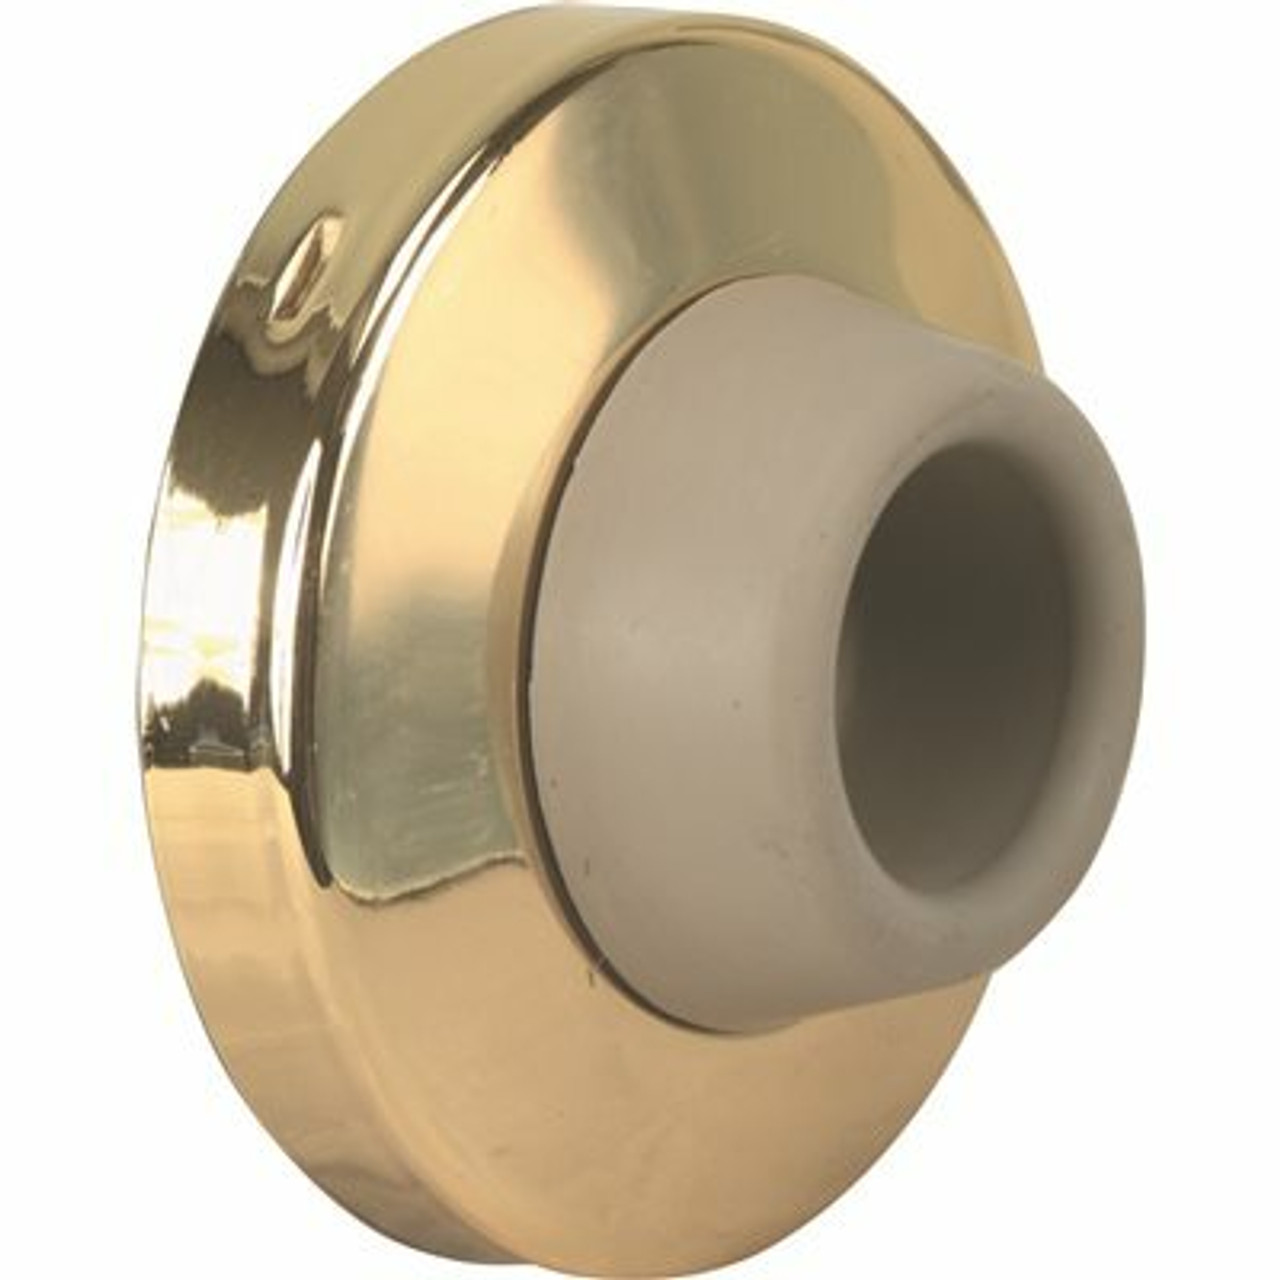 Ives Door Stop Concave Wall Concealed Mounting - 807206